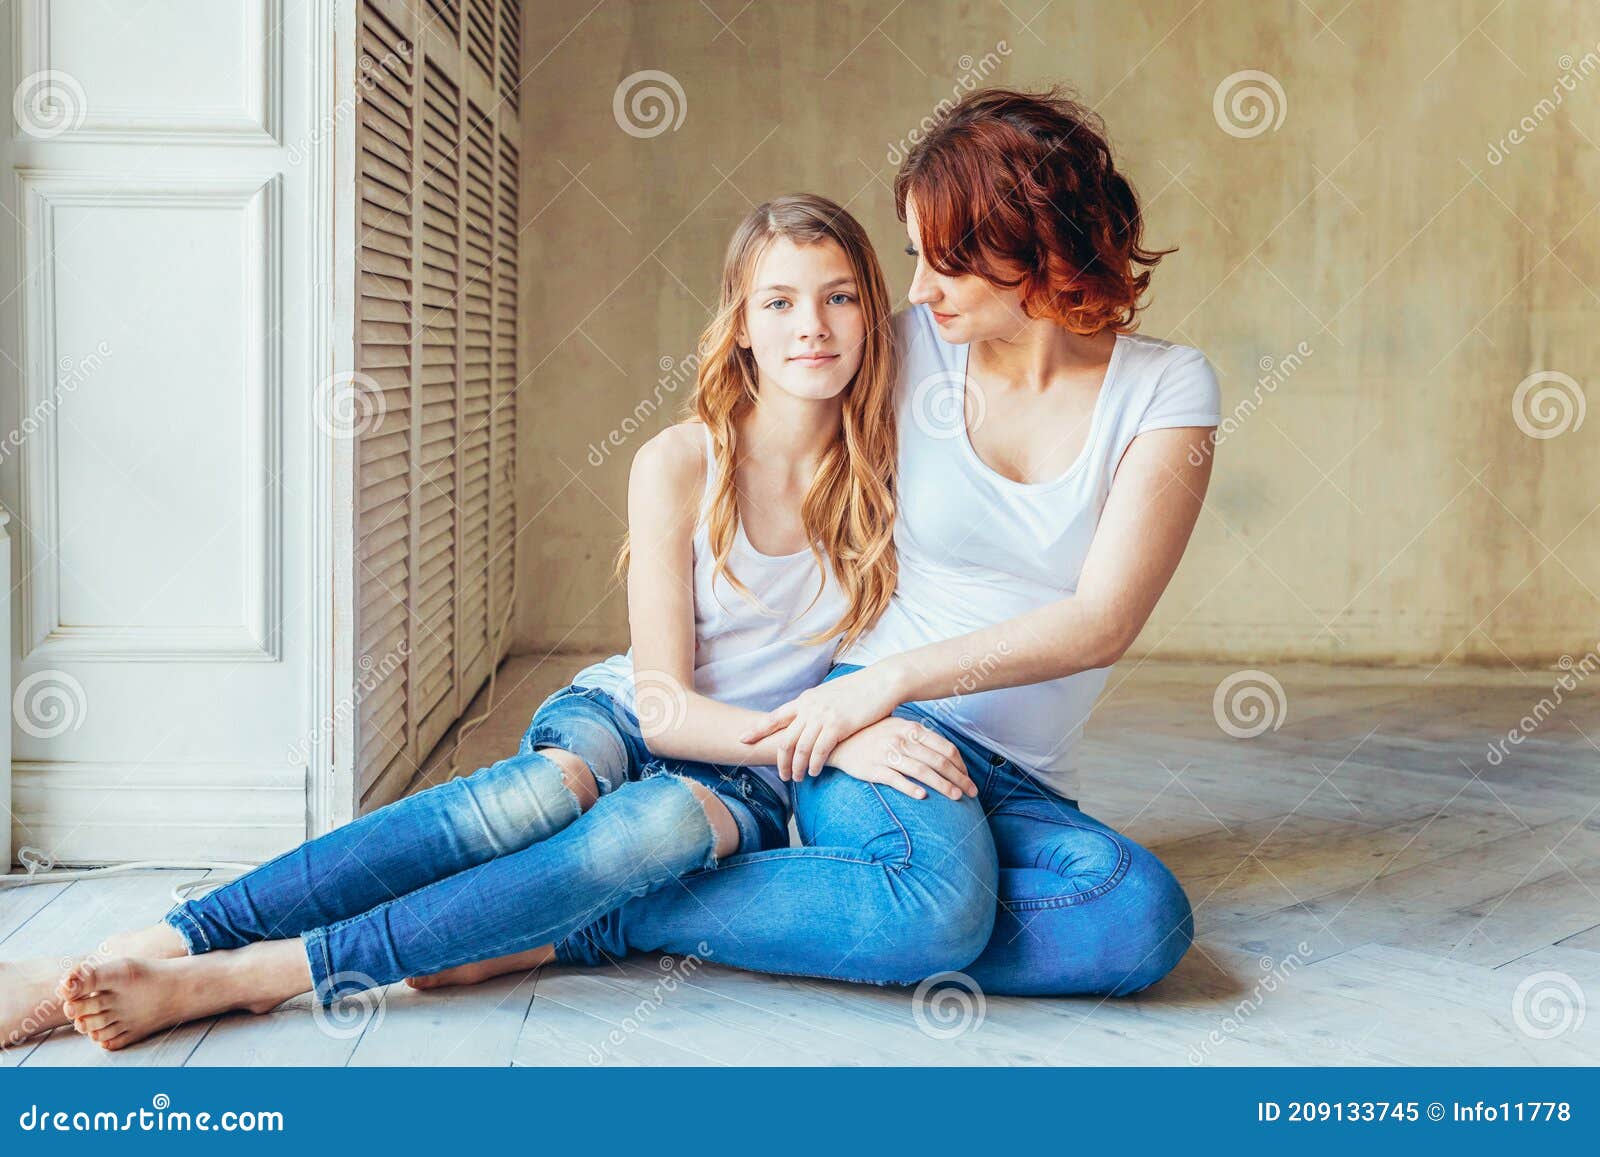 Young Mother Embracing Her Child. Woman and Teenage Girl Relaxing in